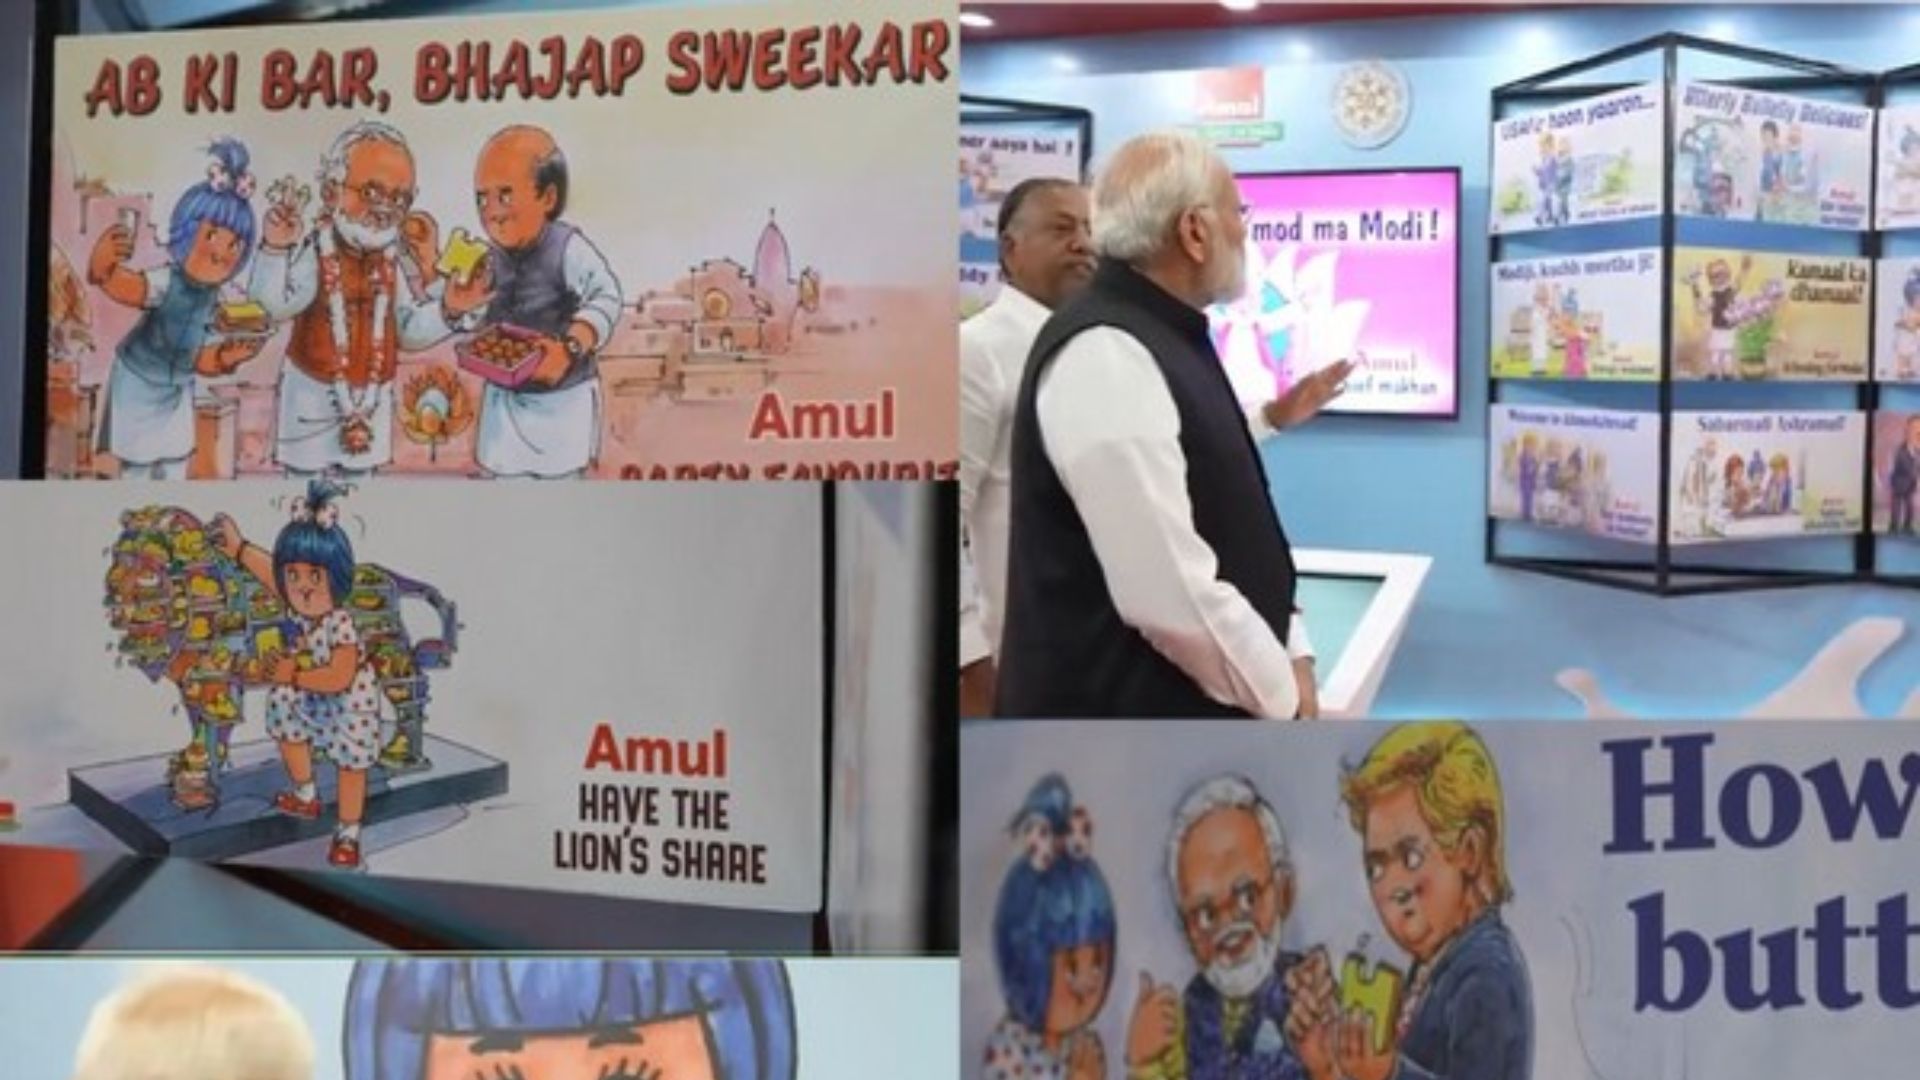 Amul's Latest Advertisements Delight Audiences with Depictions of PM Modi, BJP, and Government Programs